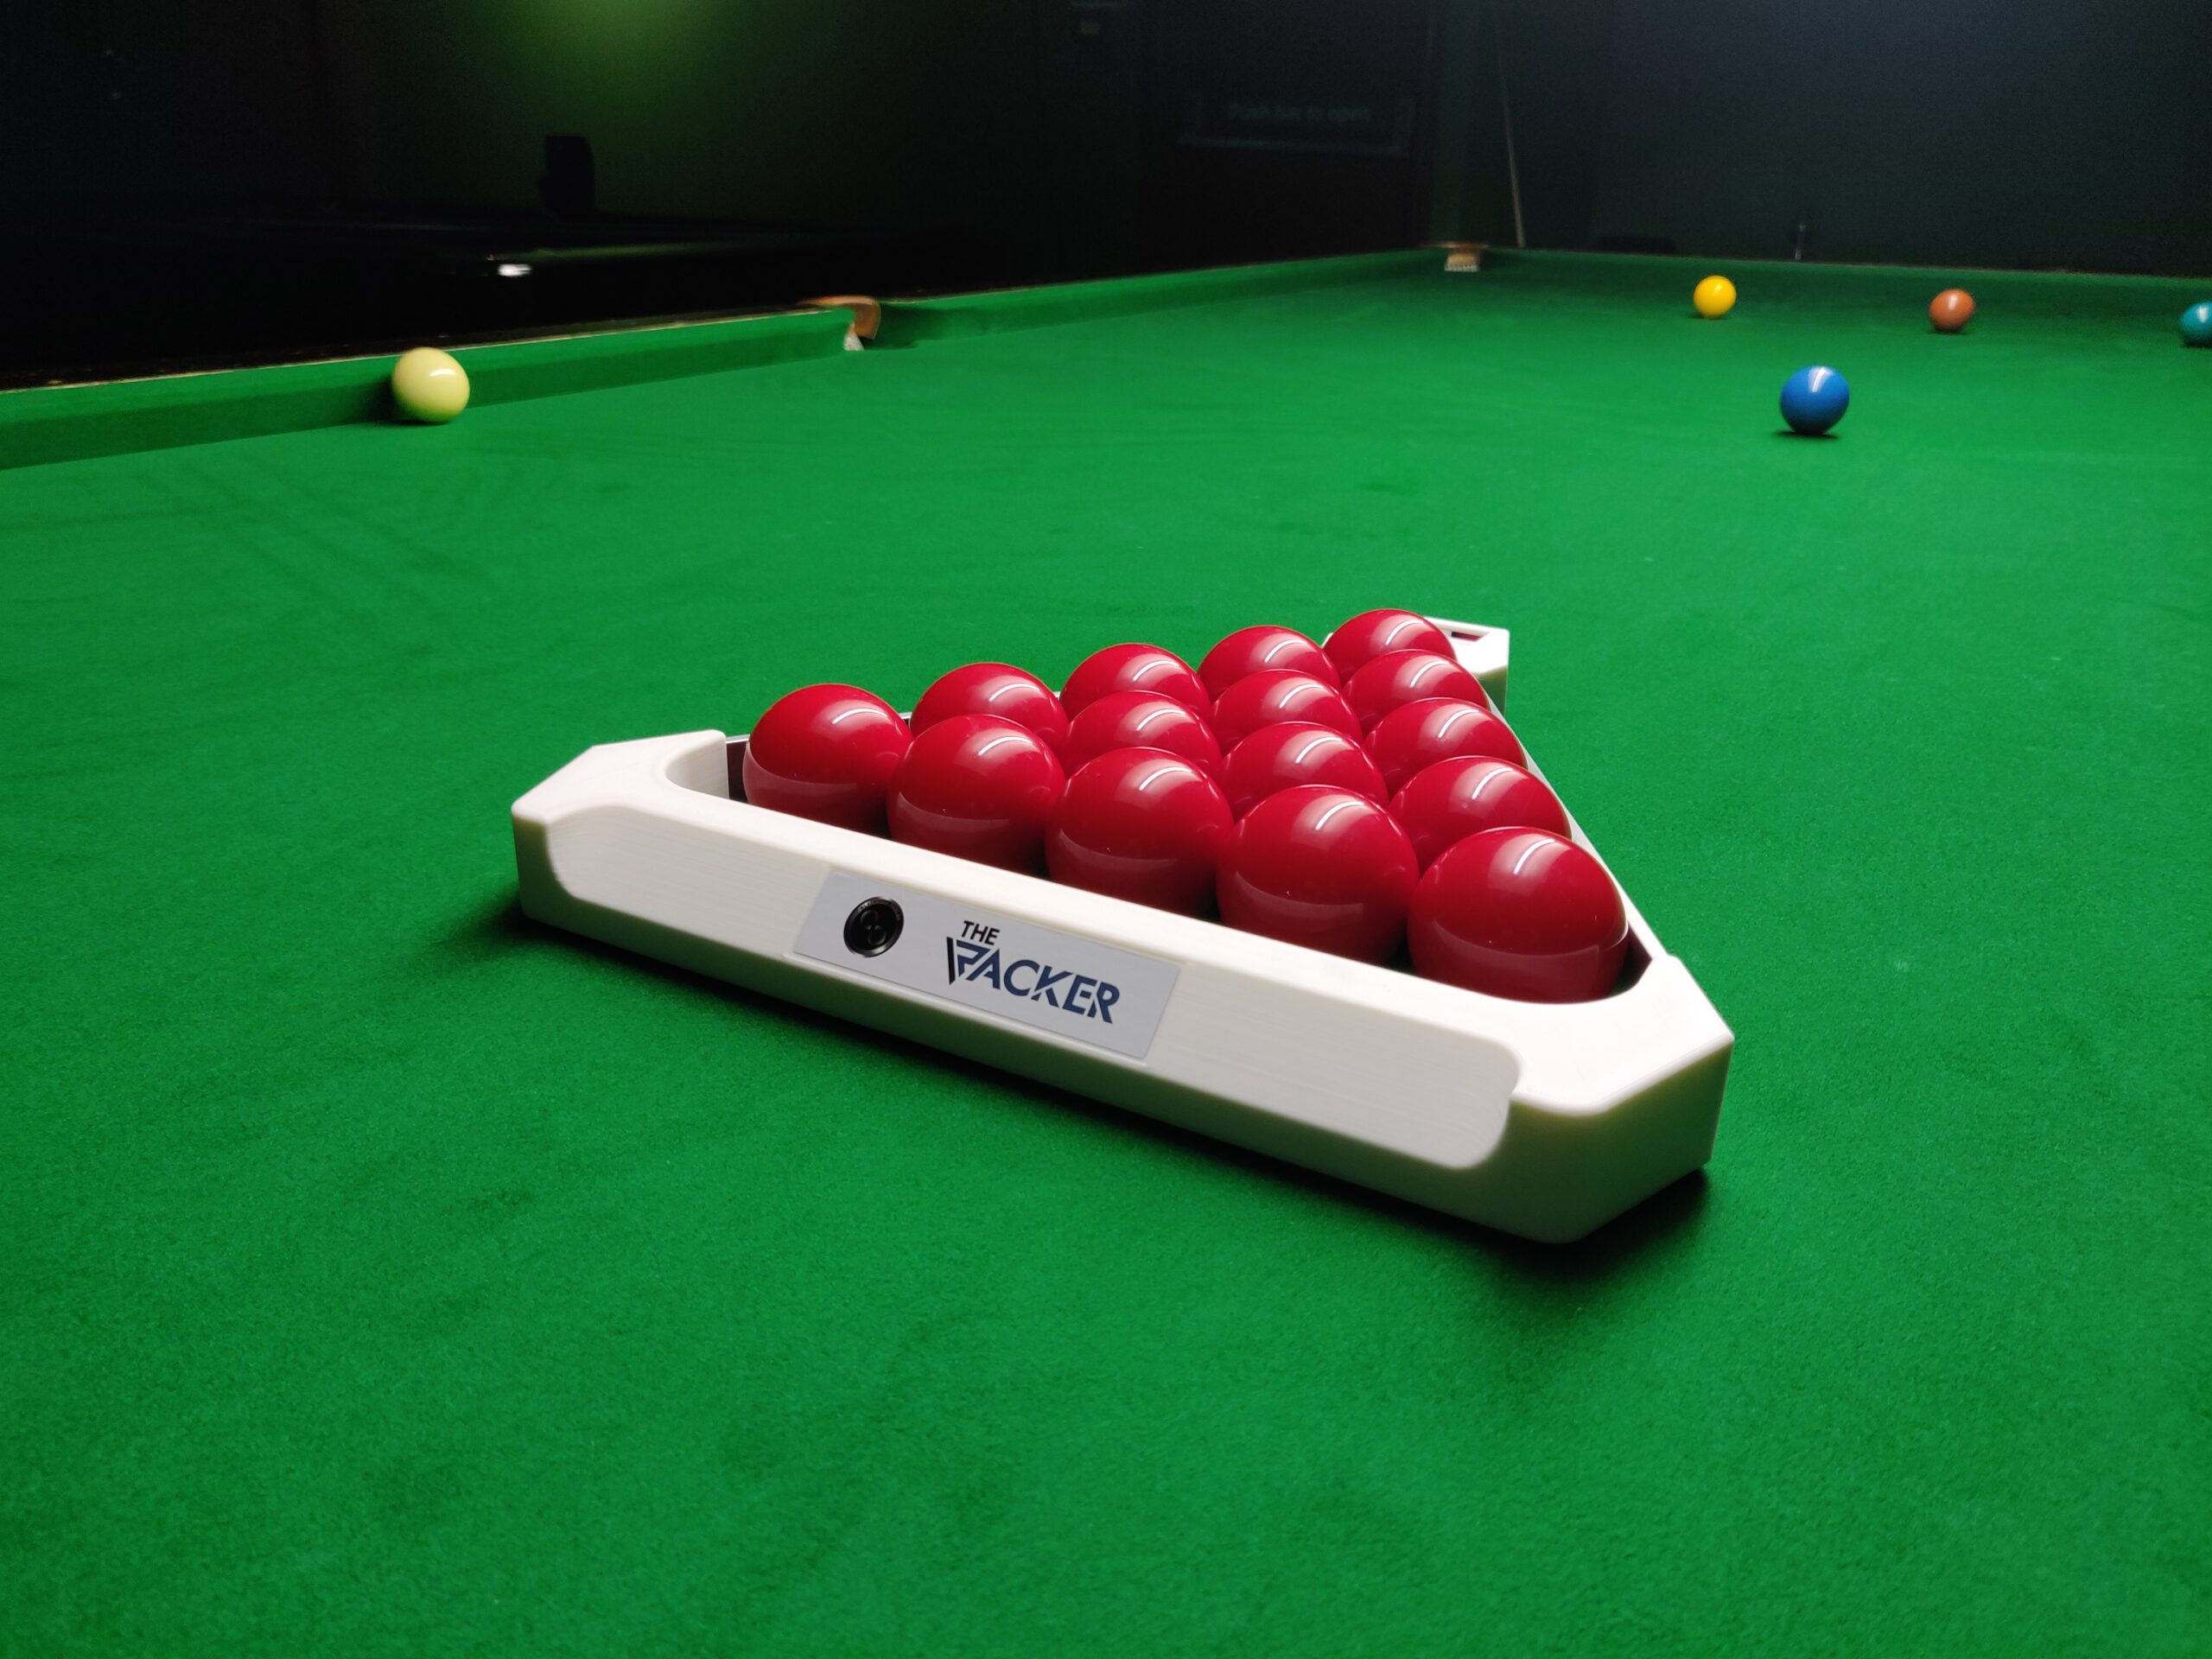 Referees Mirror Pro Racker Snooker Triangle Rack for 2 1/16th Snooker Balls 